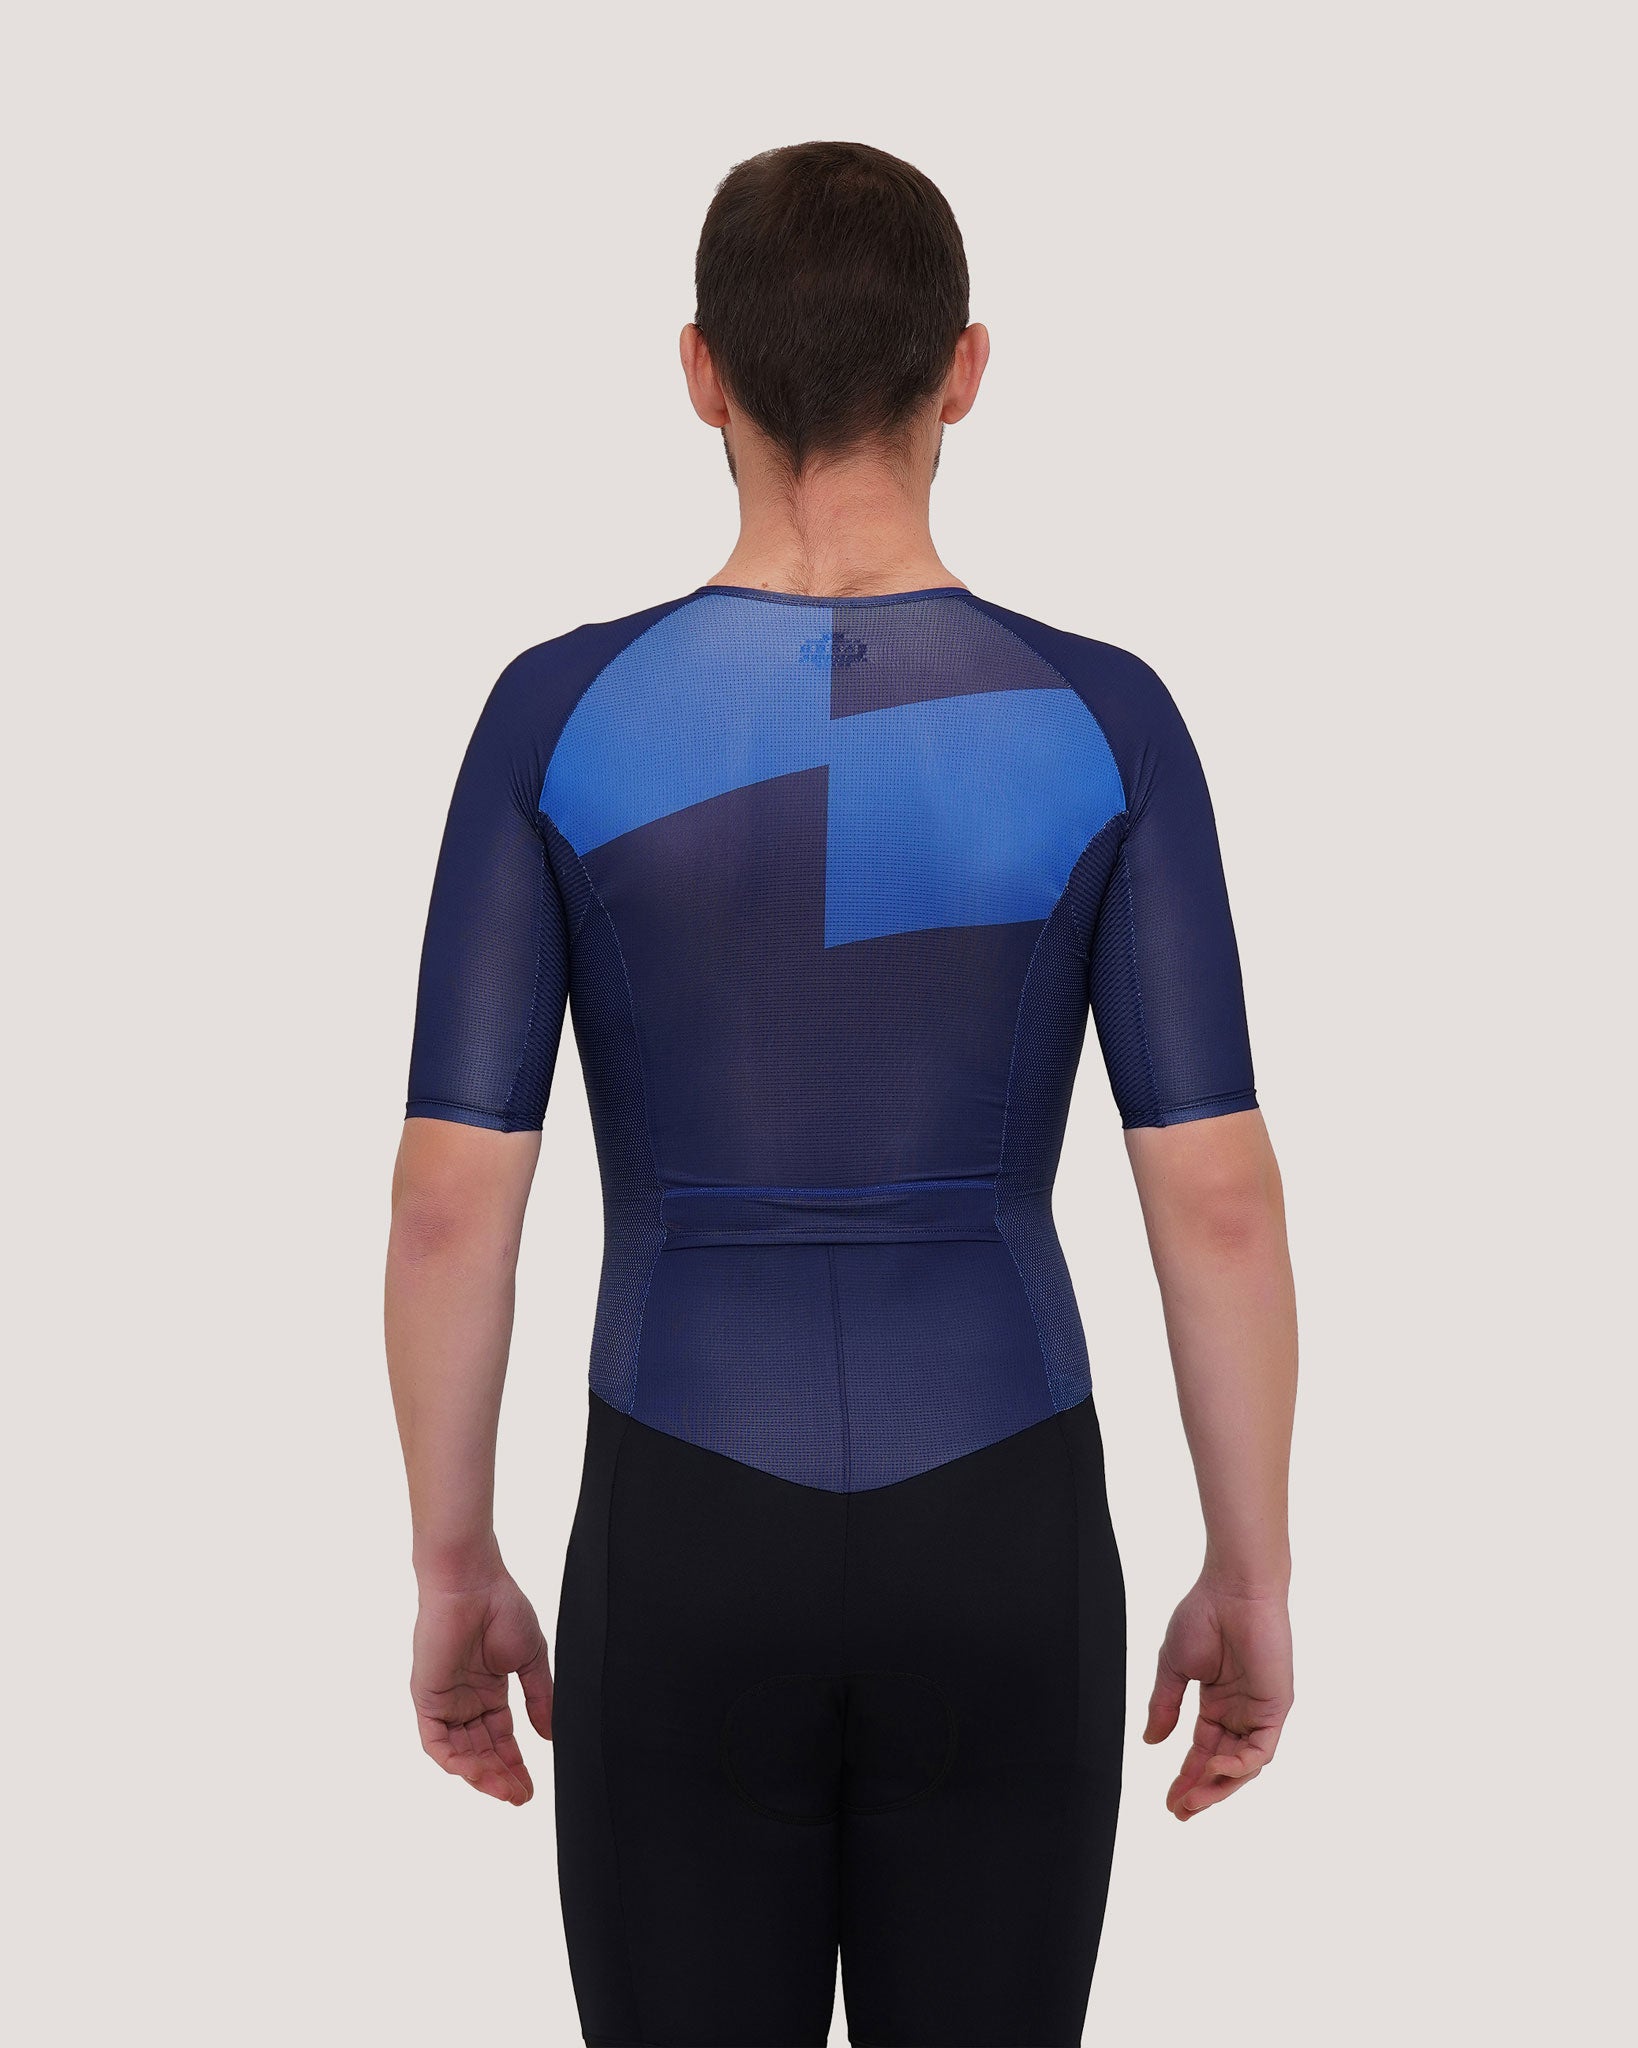 black of blue trisuit with 2 rear pockets